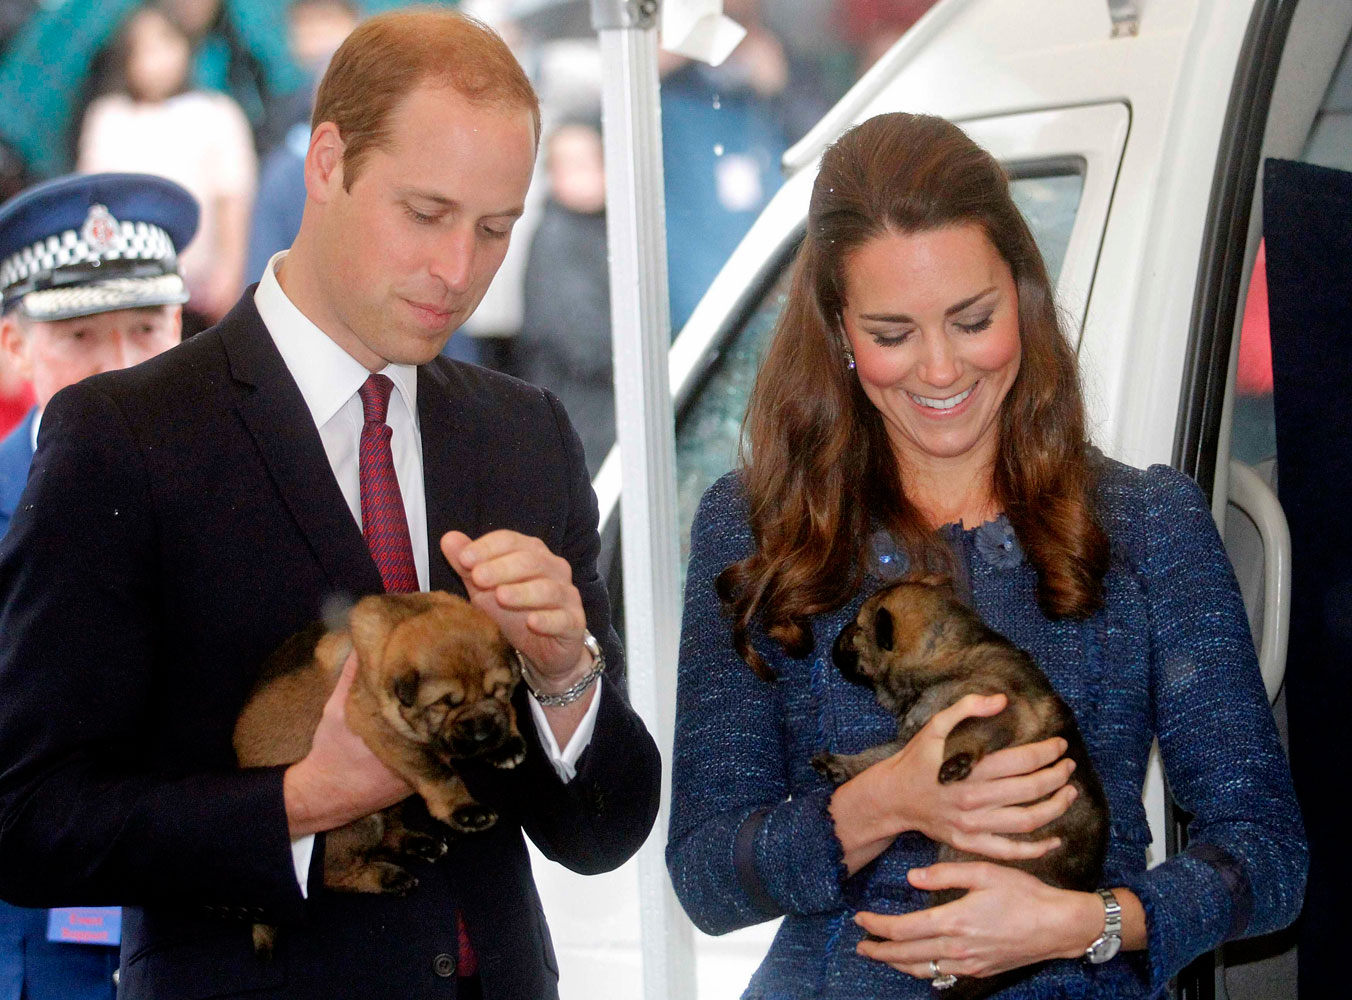 From left: Prince William, Duke of Cambridge, and Catherine, Duchess of Cambridge, hold police dog puppies at the Royal New Zealand Police College in Wellington, New Zealand, on April 16, 2014.